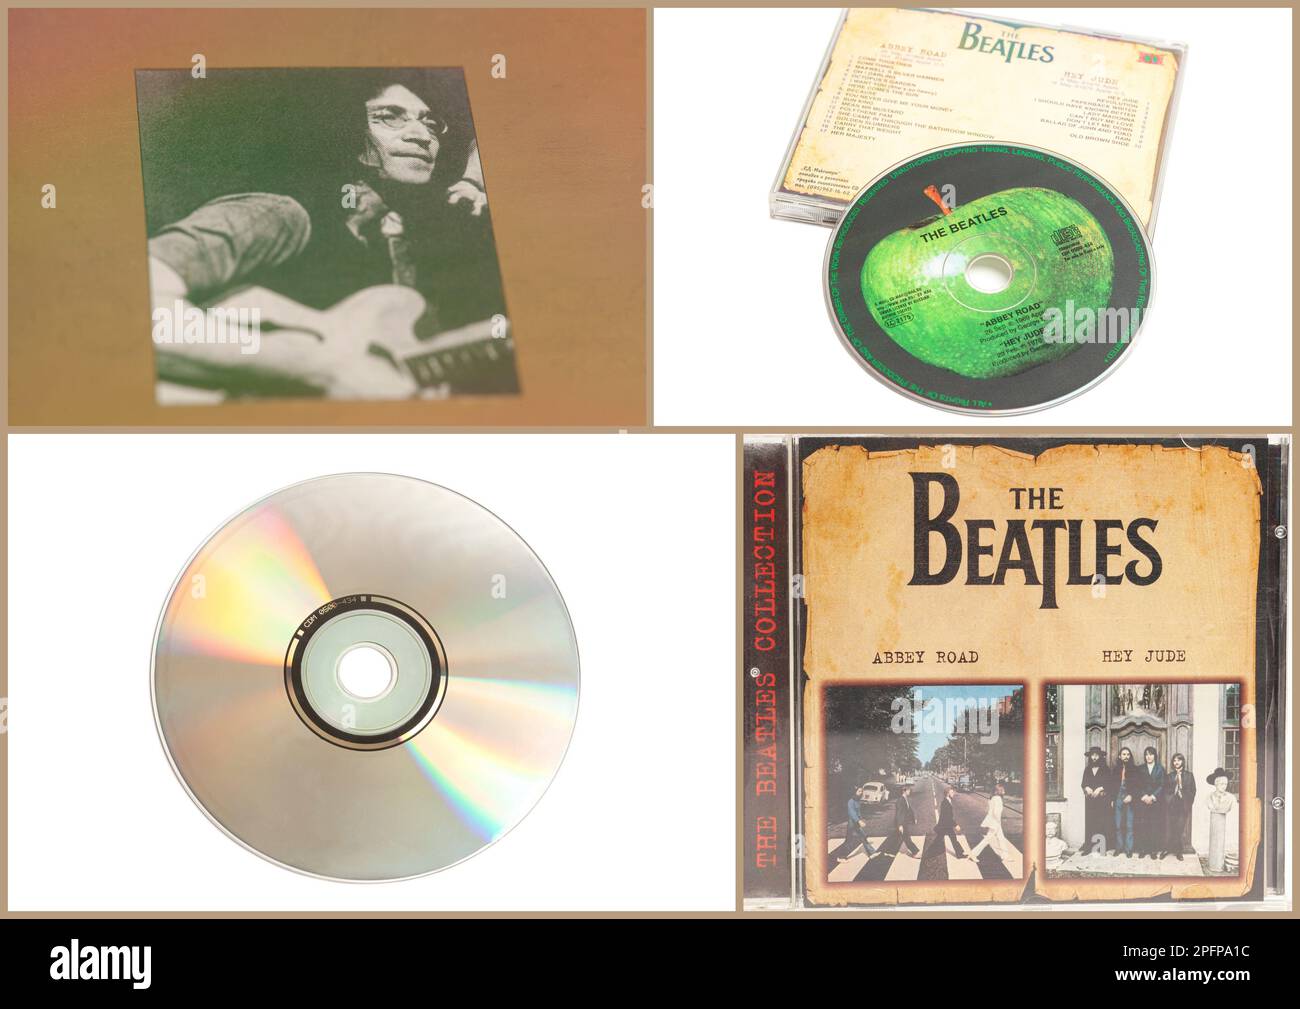 Moscow, Russia, 18 March 2023: CD by The Beatles Abbey Road, Hey Jude,portrait of John lennon on the cover of the CD Forever Gold,collage Stock Photo